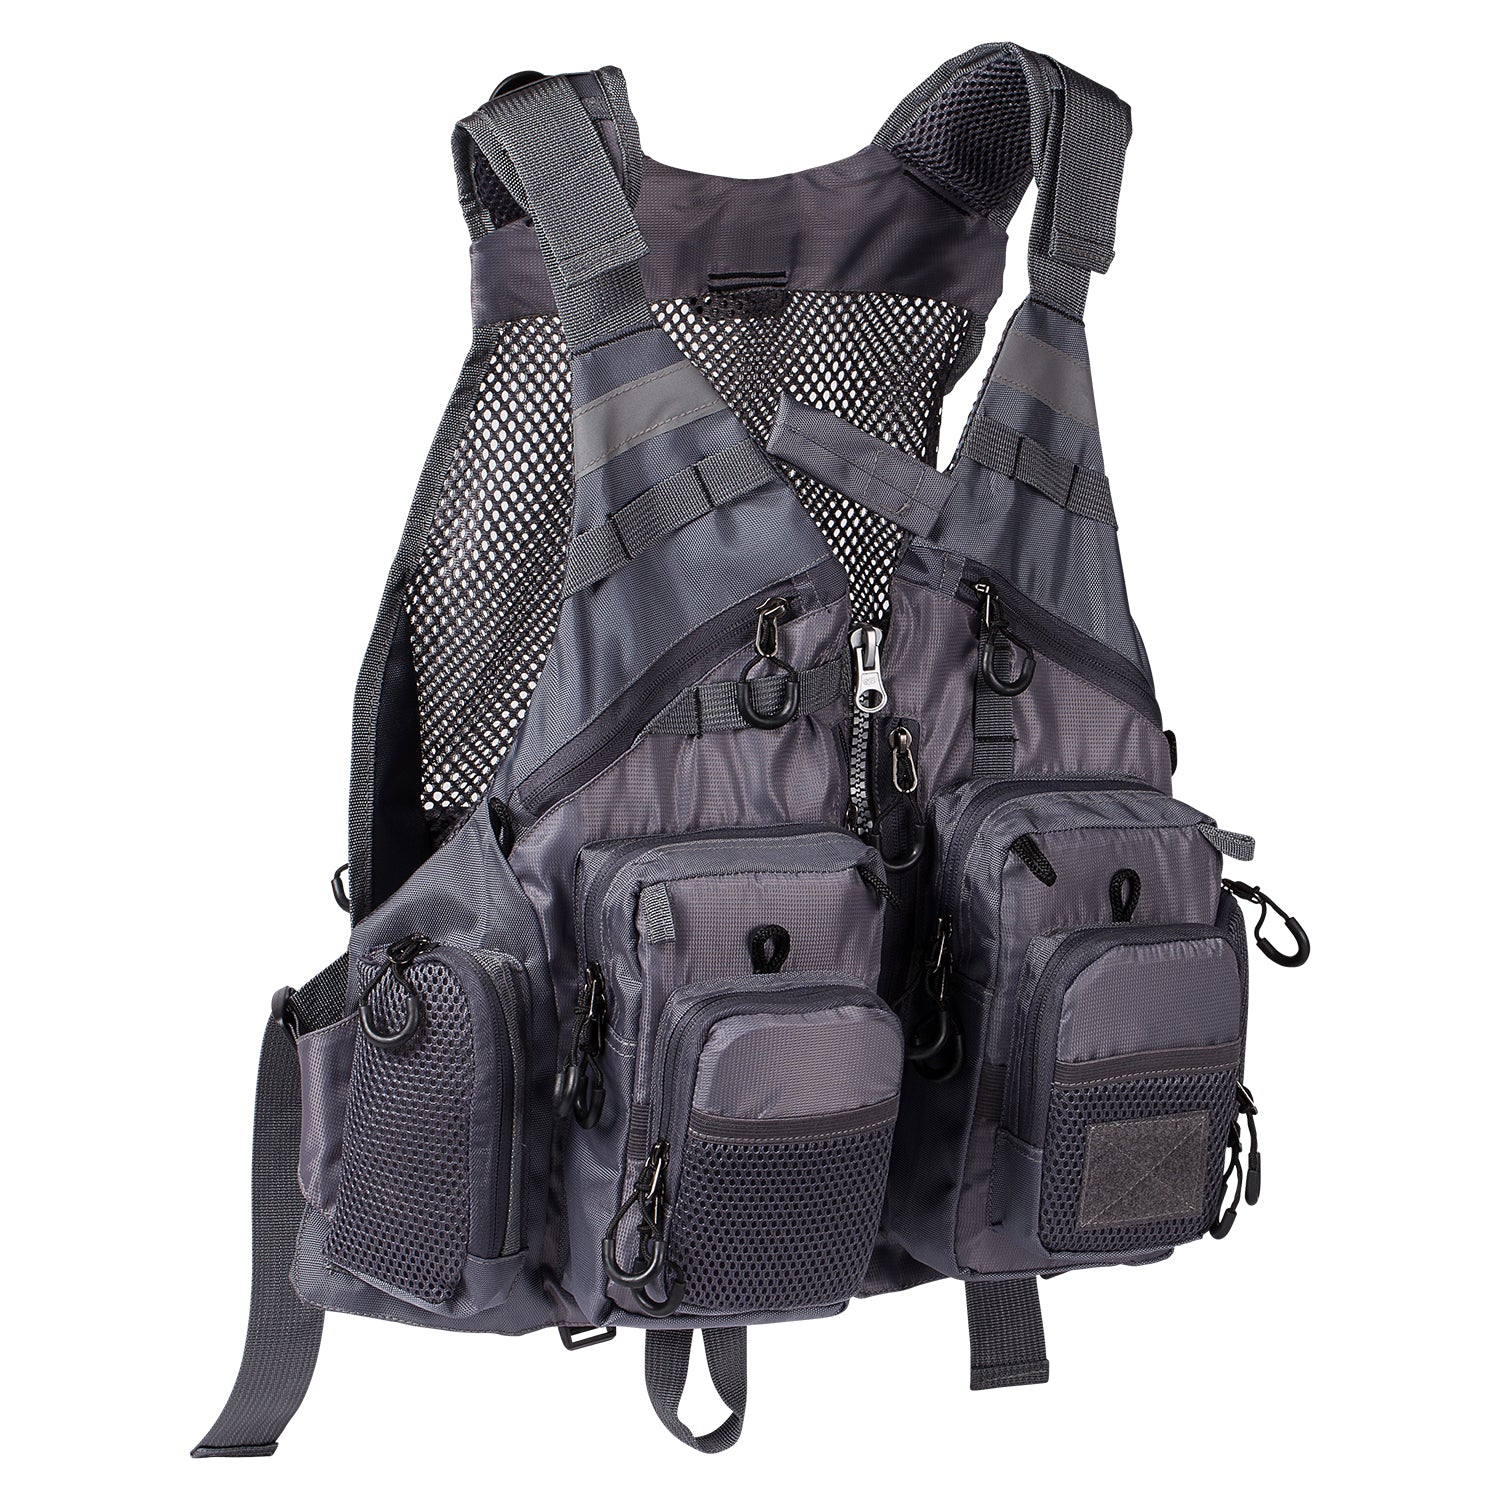 Bassdash - Enjoy the Bass fishing season with Bassdash vest - you'll have  the tackle and tools you need on hand at all times. View Bassdash vests in  various types:  #Bassdashfishing #